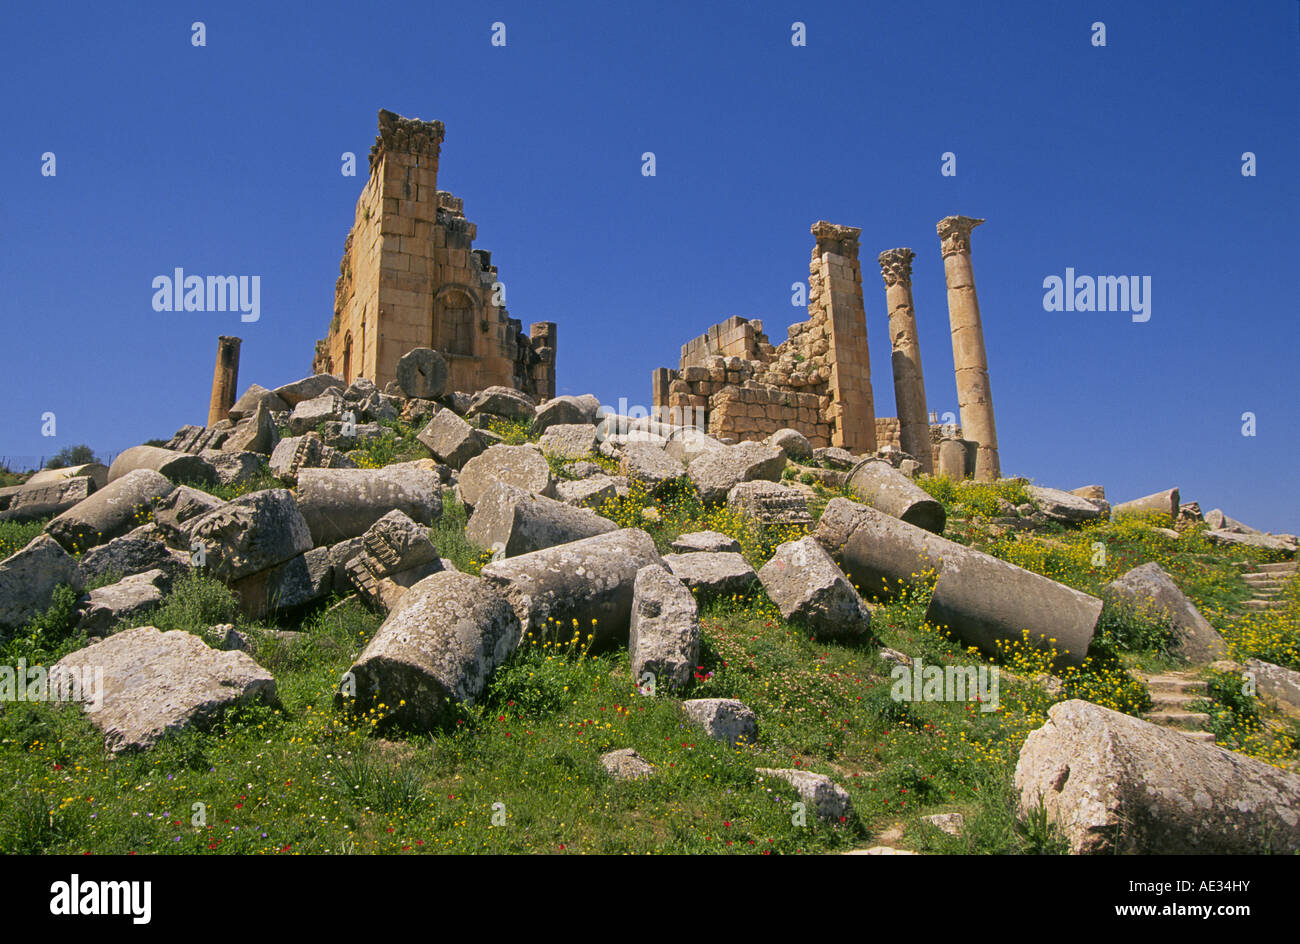 A view of the stone ruins in the ancient Roman and Crusader city of Jerash near Amman Jordan Stock Photo